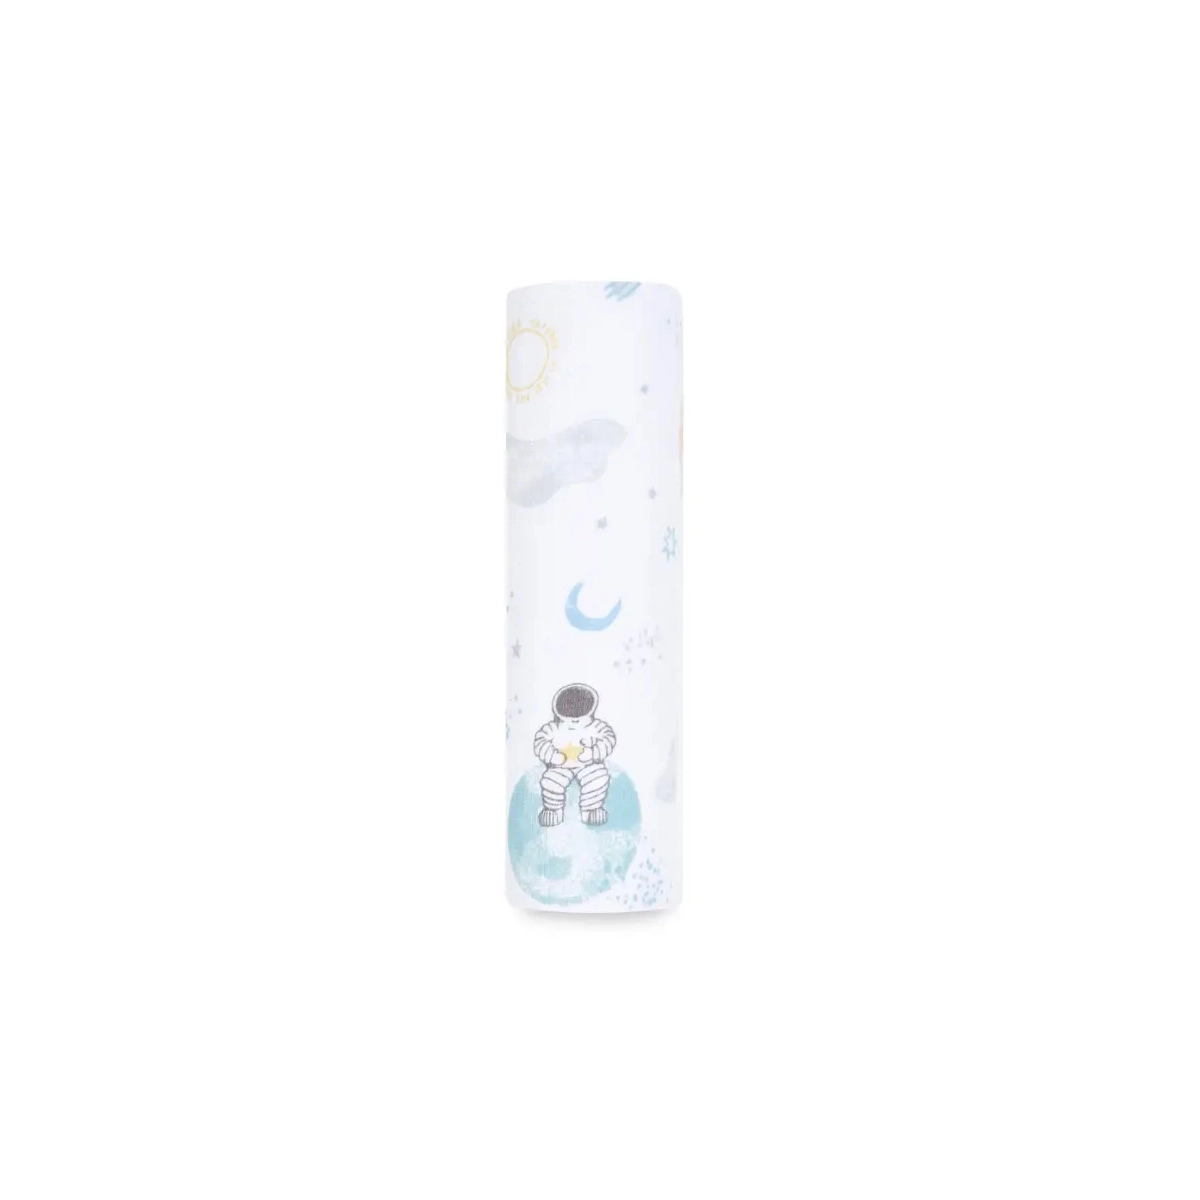 Image of Aden + Anais Essential Cotton Muslin Swaddle Blanket - Space Explorers (23-19-268)